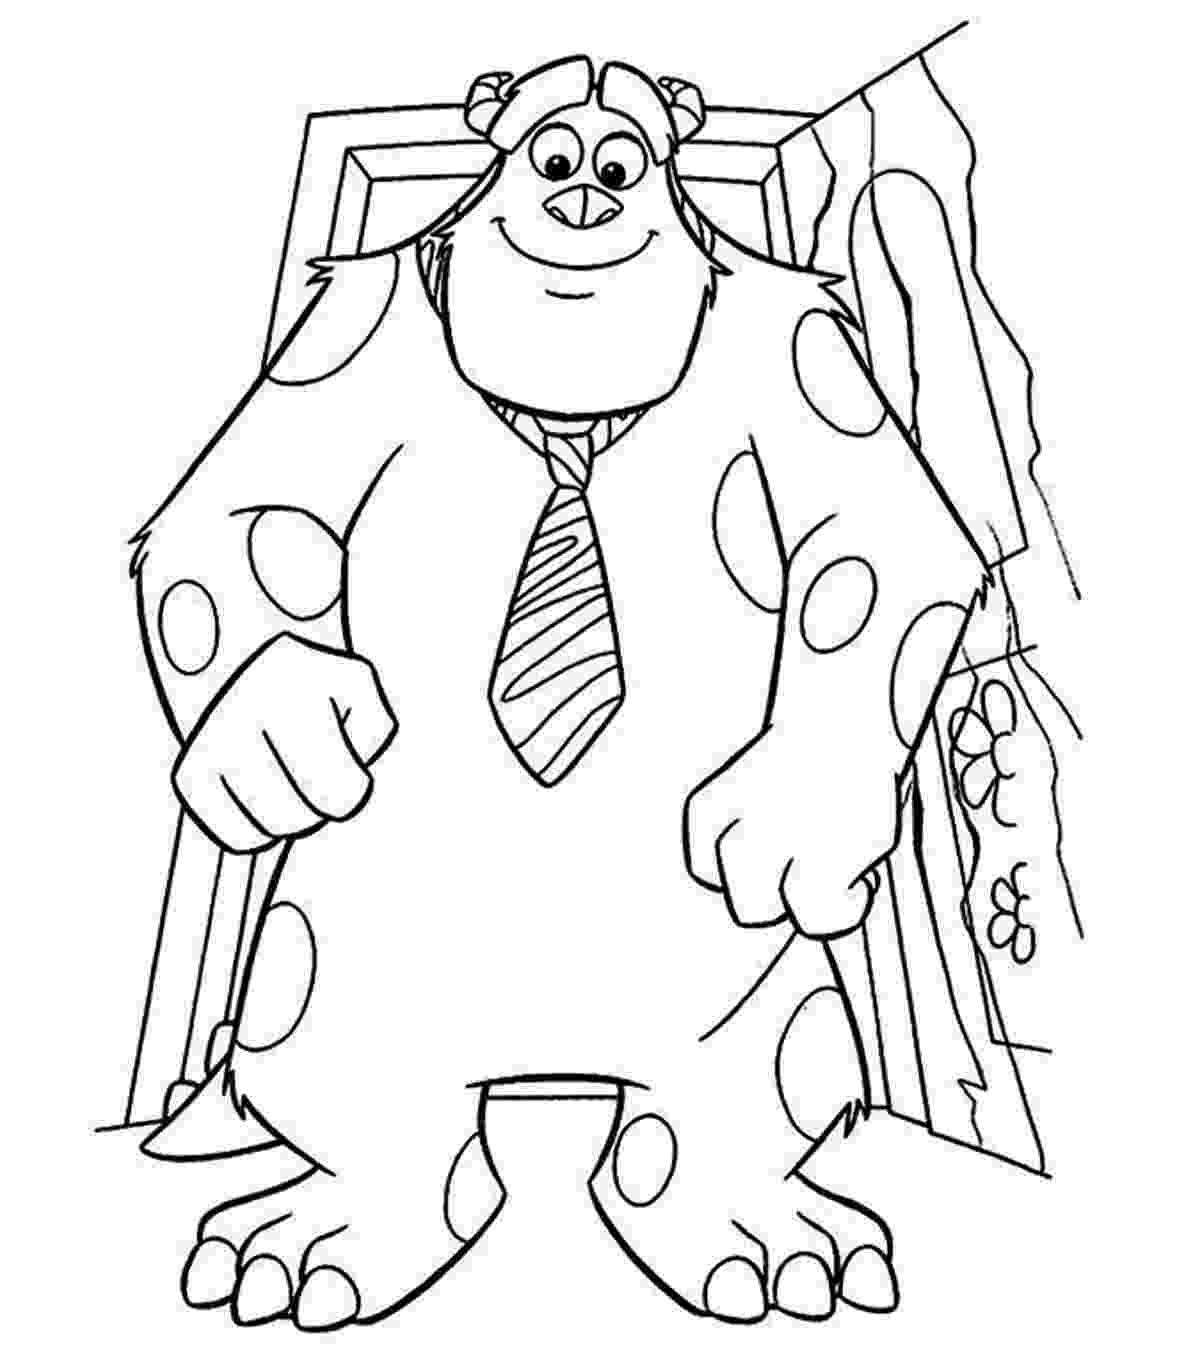 monsters inc coloring page monsters inc coloring pages best coloring pages for kids page monsters coloring inc 